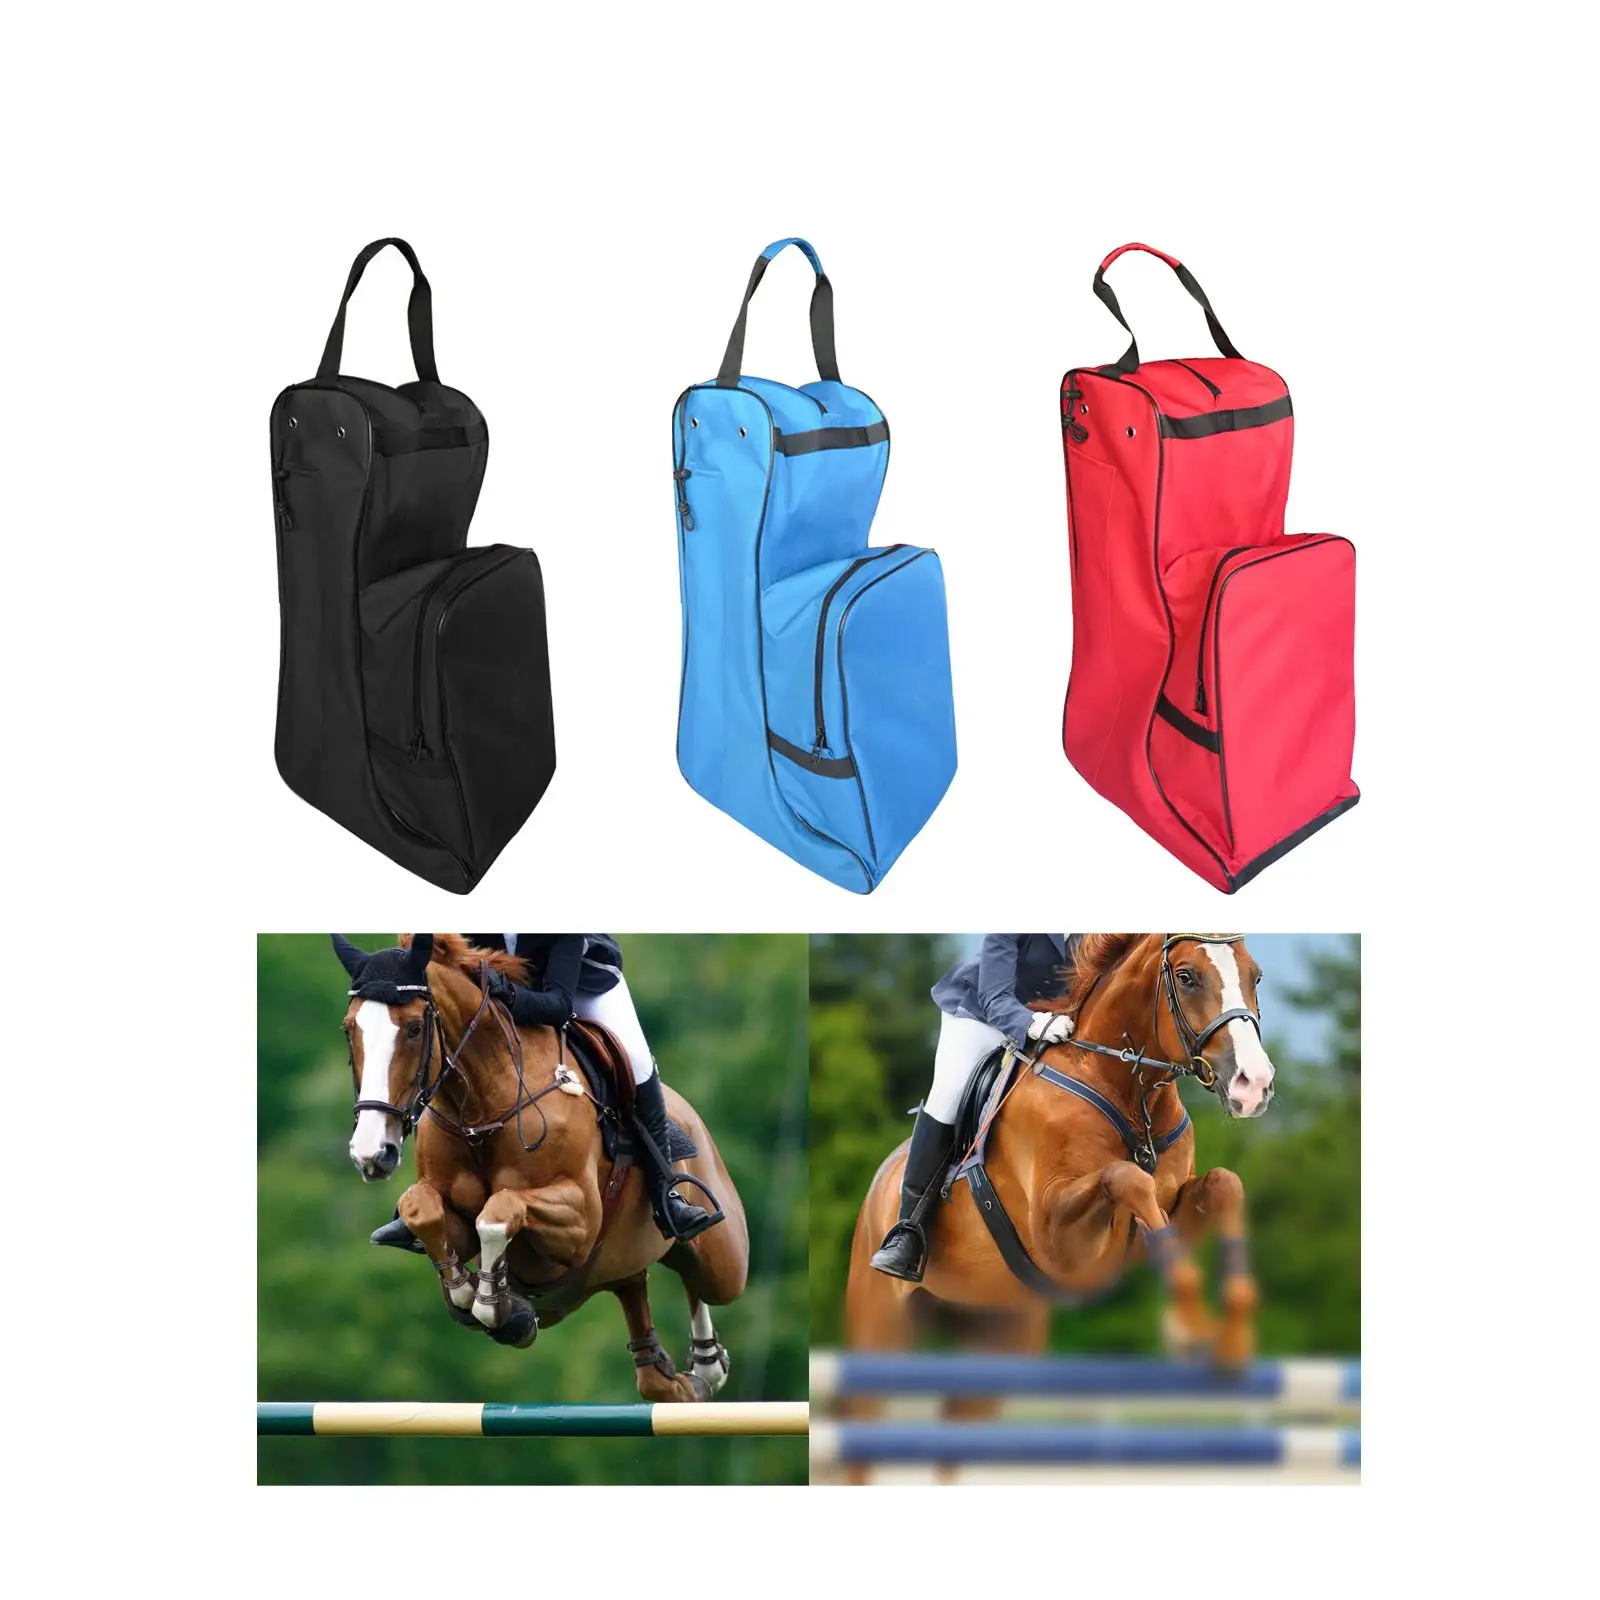 Equestrian Bag Boots Carry Bag Multipurpose Durable Convenient with Pocket Organizer for Sports Camping and Shopping